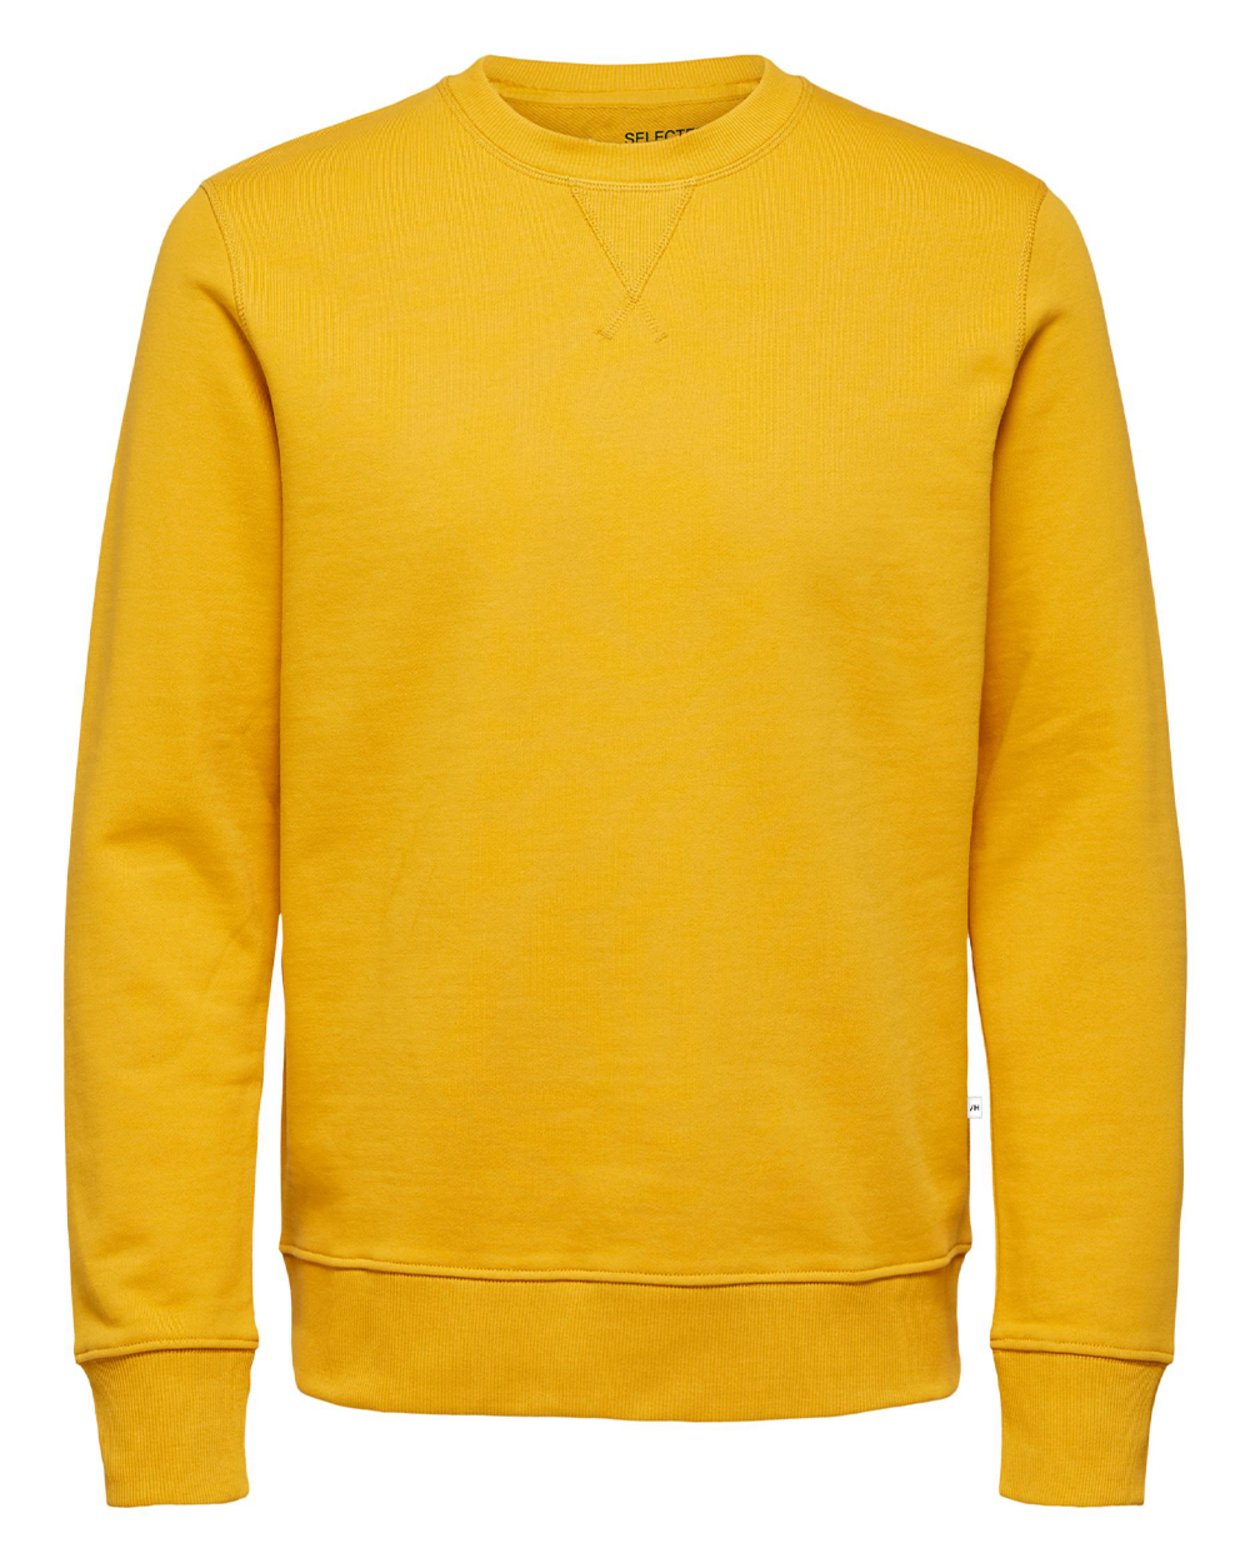 Jason Crew Neck Sweater | Fresh Spring/Summer Menswear by Selected ...